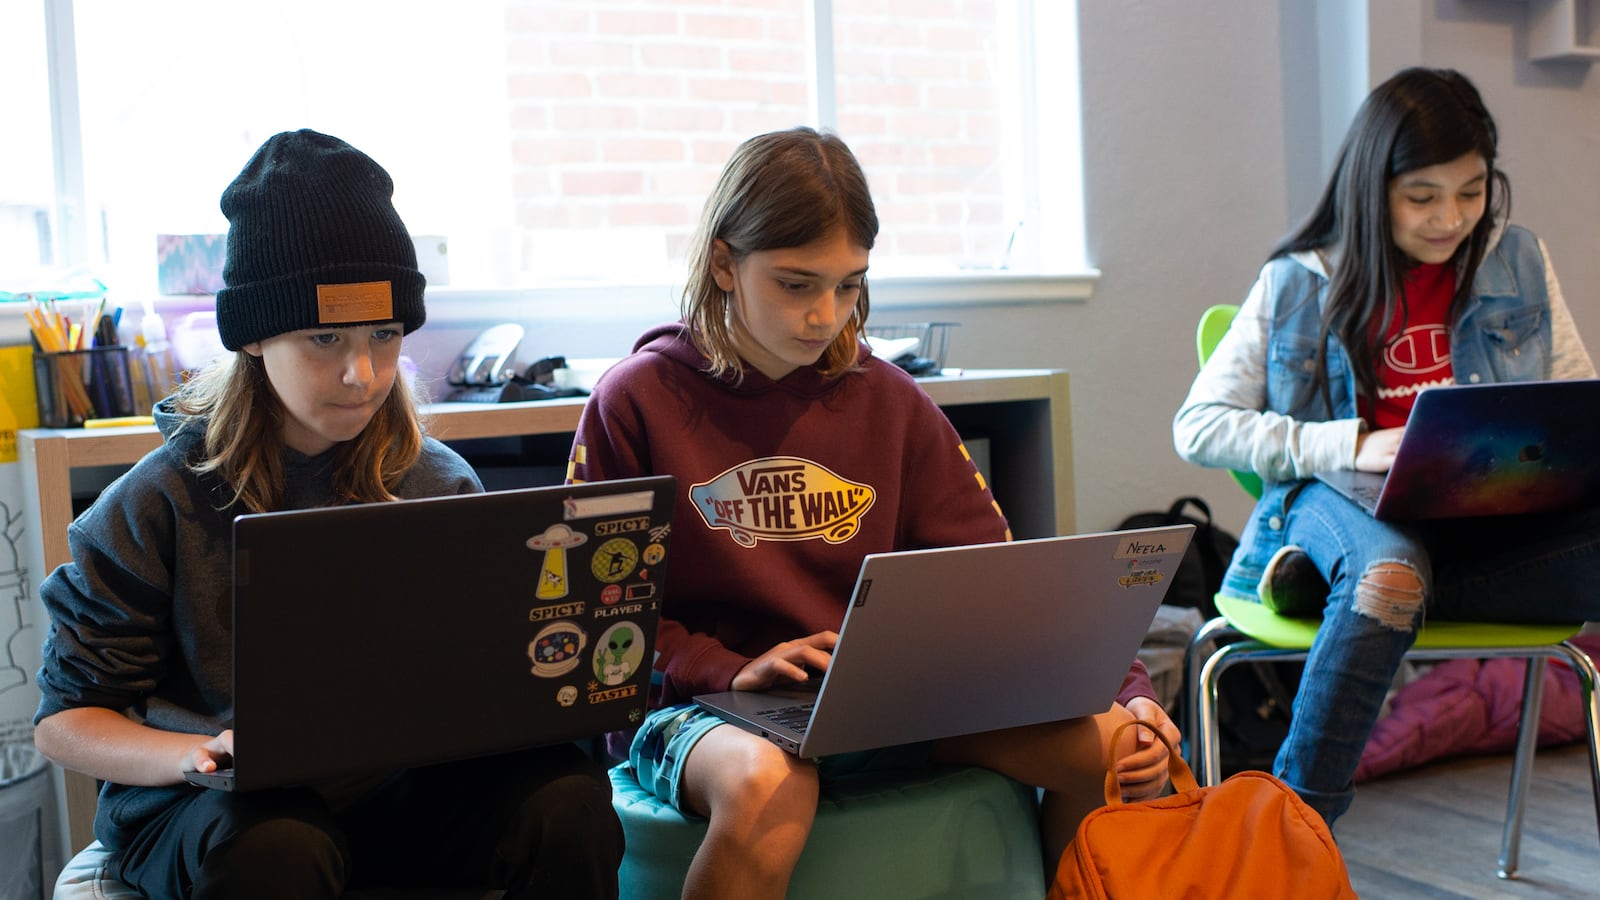 Three children work intently on laptops. Two are sitting on what look like ottomans or cushions, and the third is in a chair. 